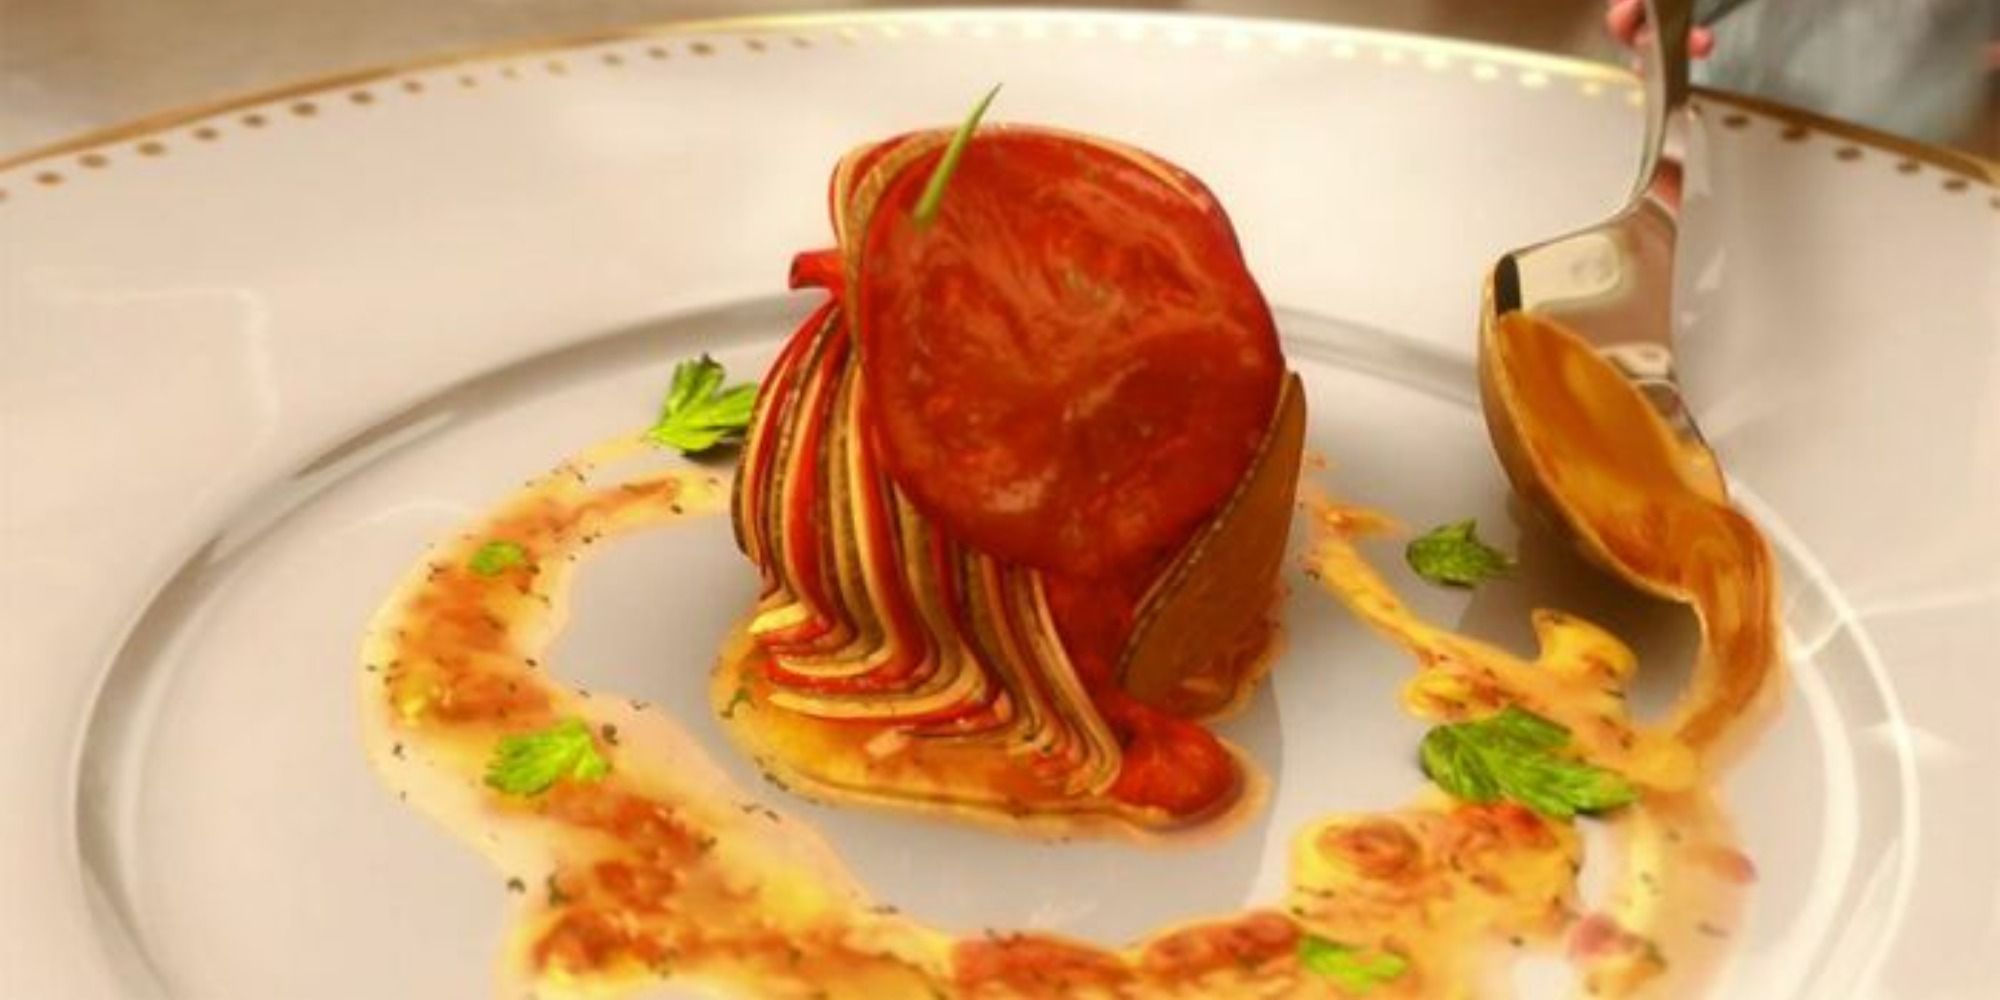 Image of the dish in Ratatouille.